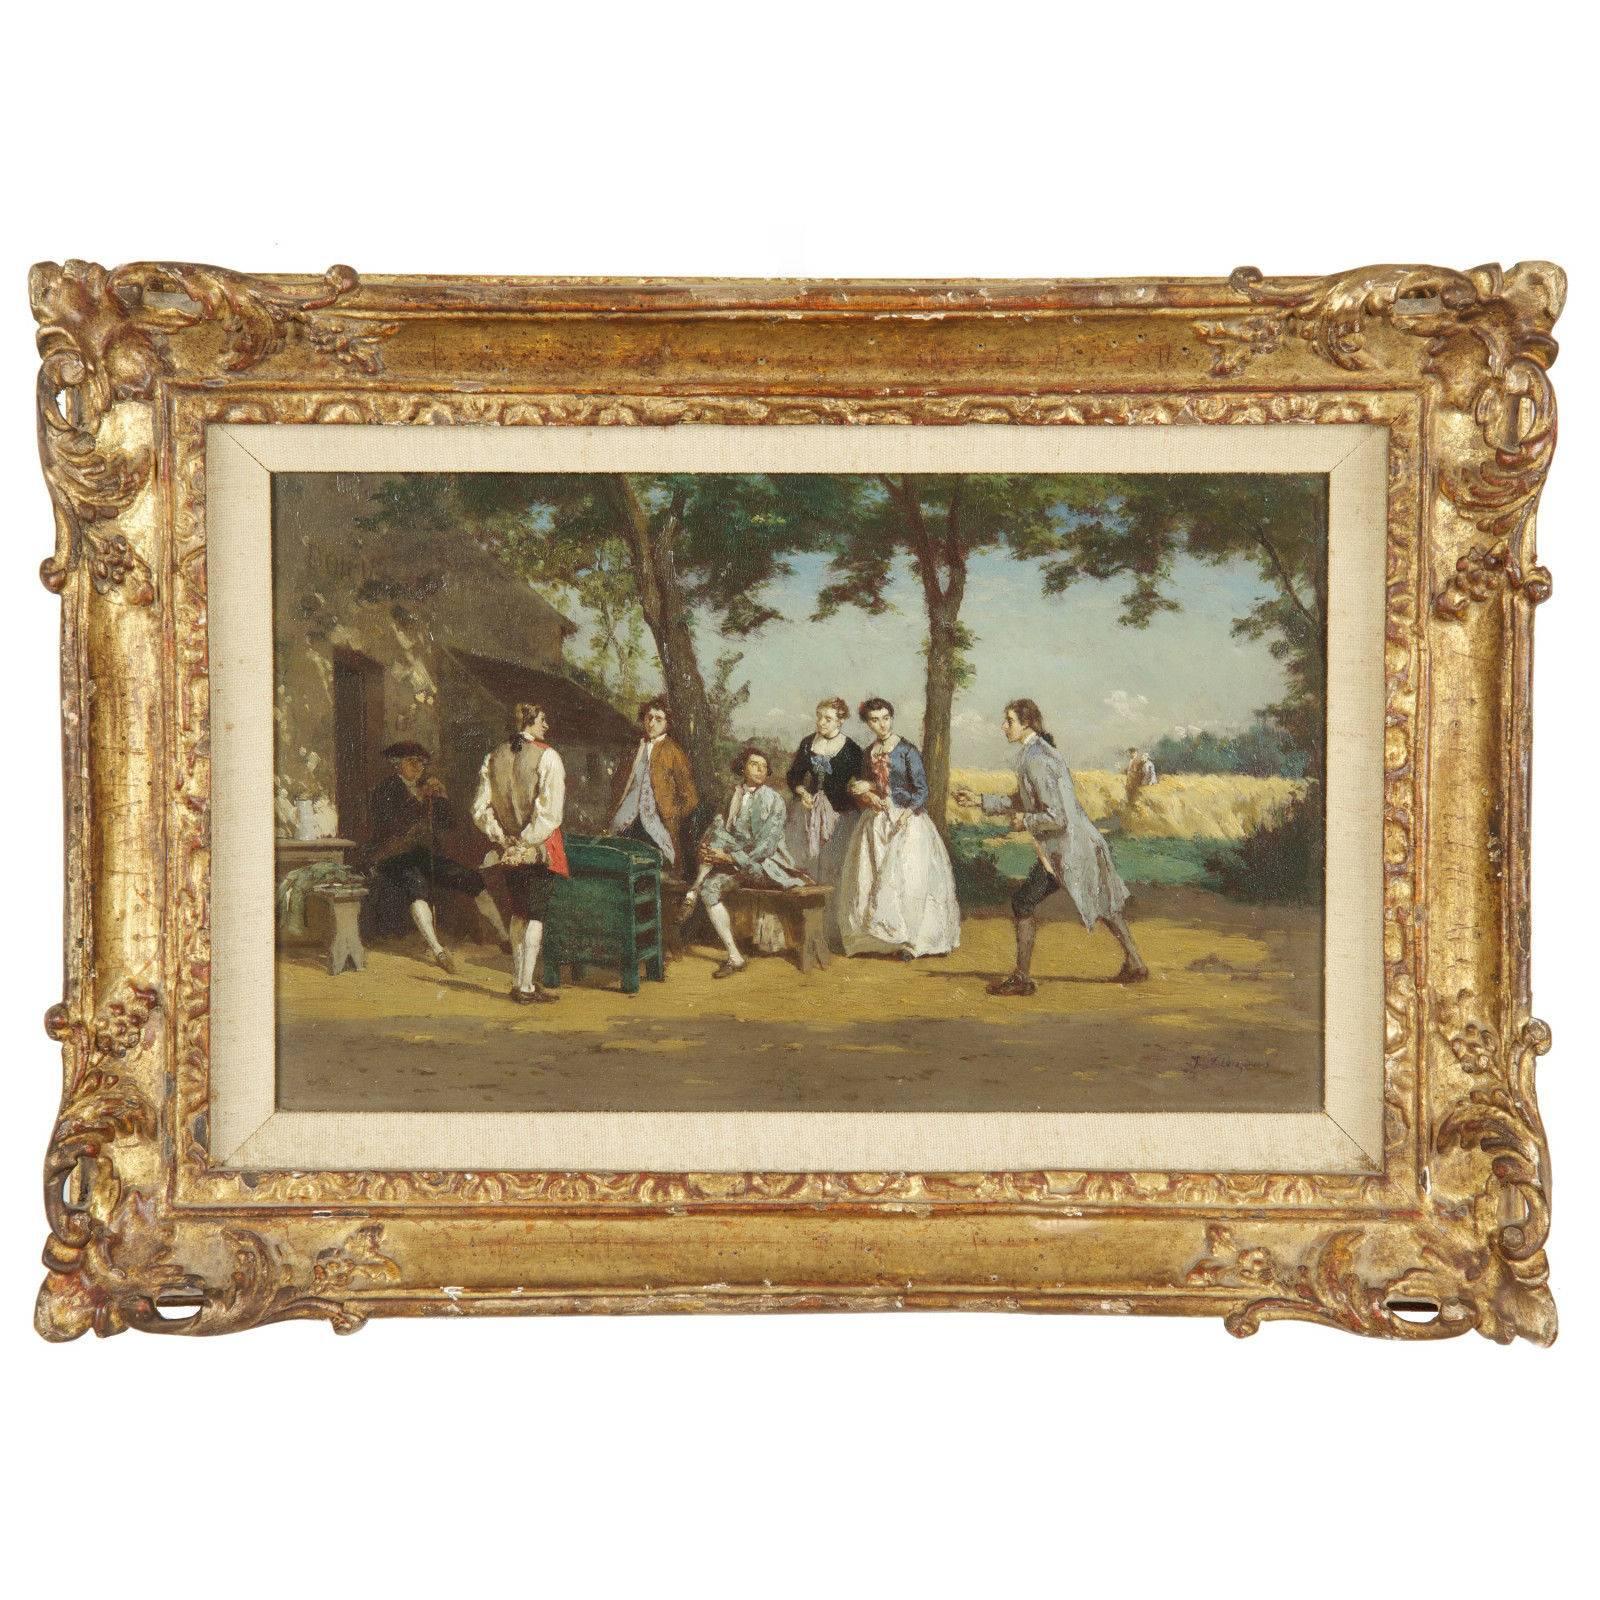 19th Century French Antique Painting of "Good Wine" by Jean Pezous